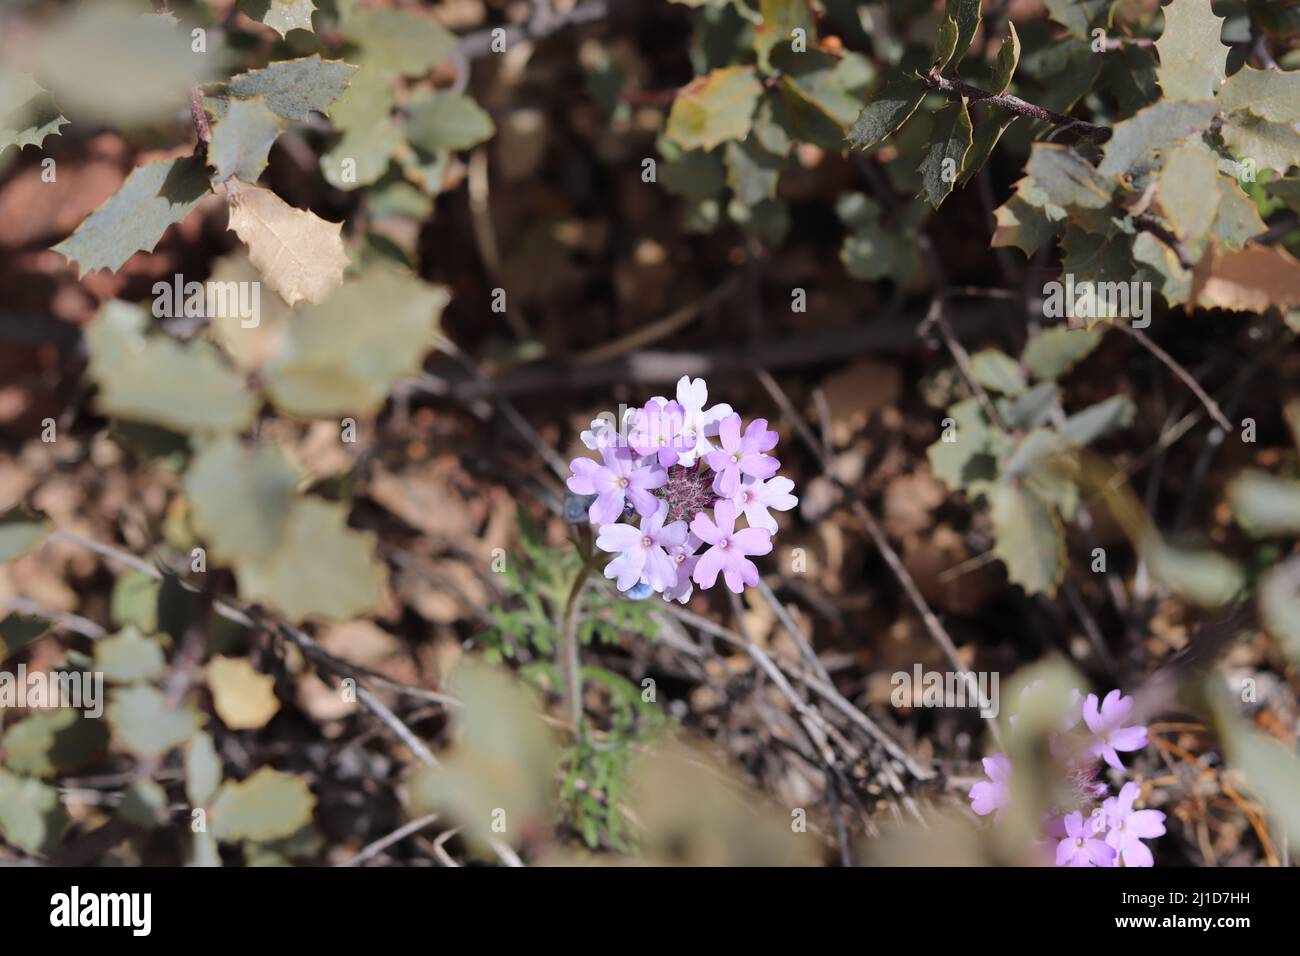 Close up of a cluster of Mock vervains or Glandularia surrounded by foliage at Rumsey Park in Payson, Arizona. Stock Photo